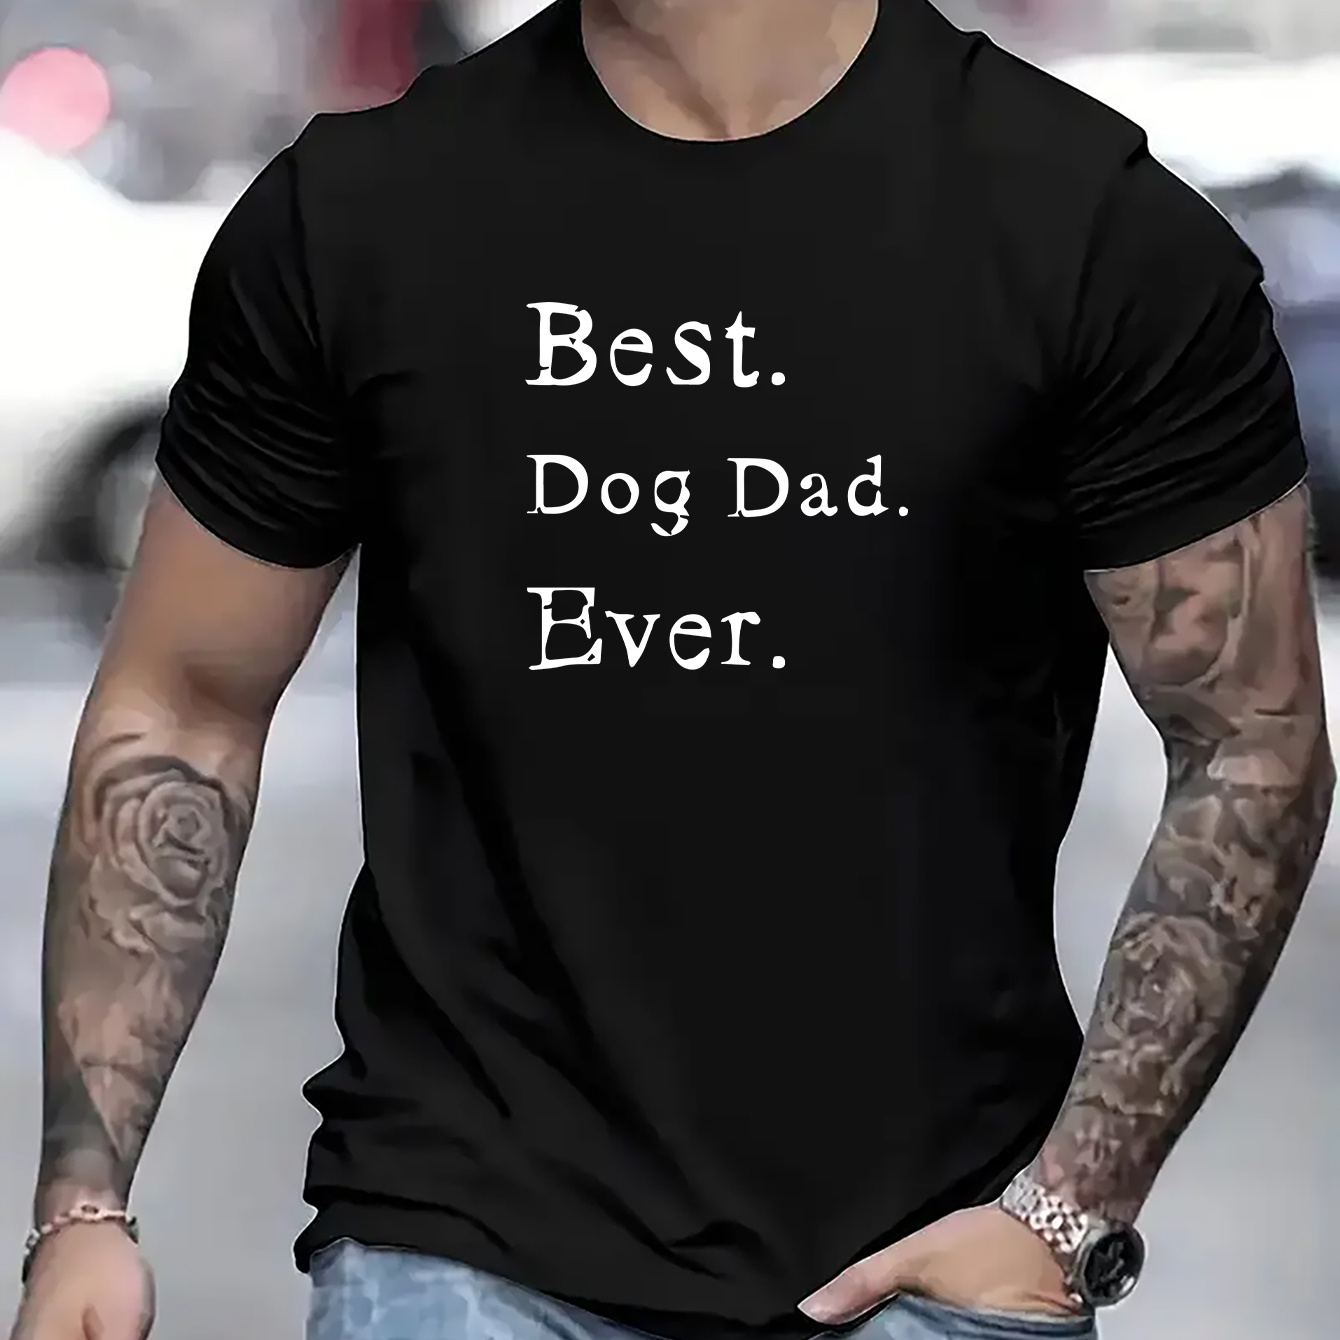 

Best Dog Dad Ever Print T Shirt, Tees For Men, Casual Short Sleeve T-shirt For Summer